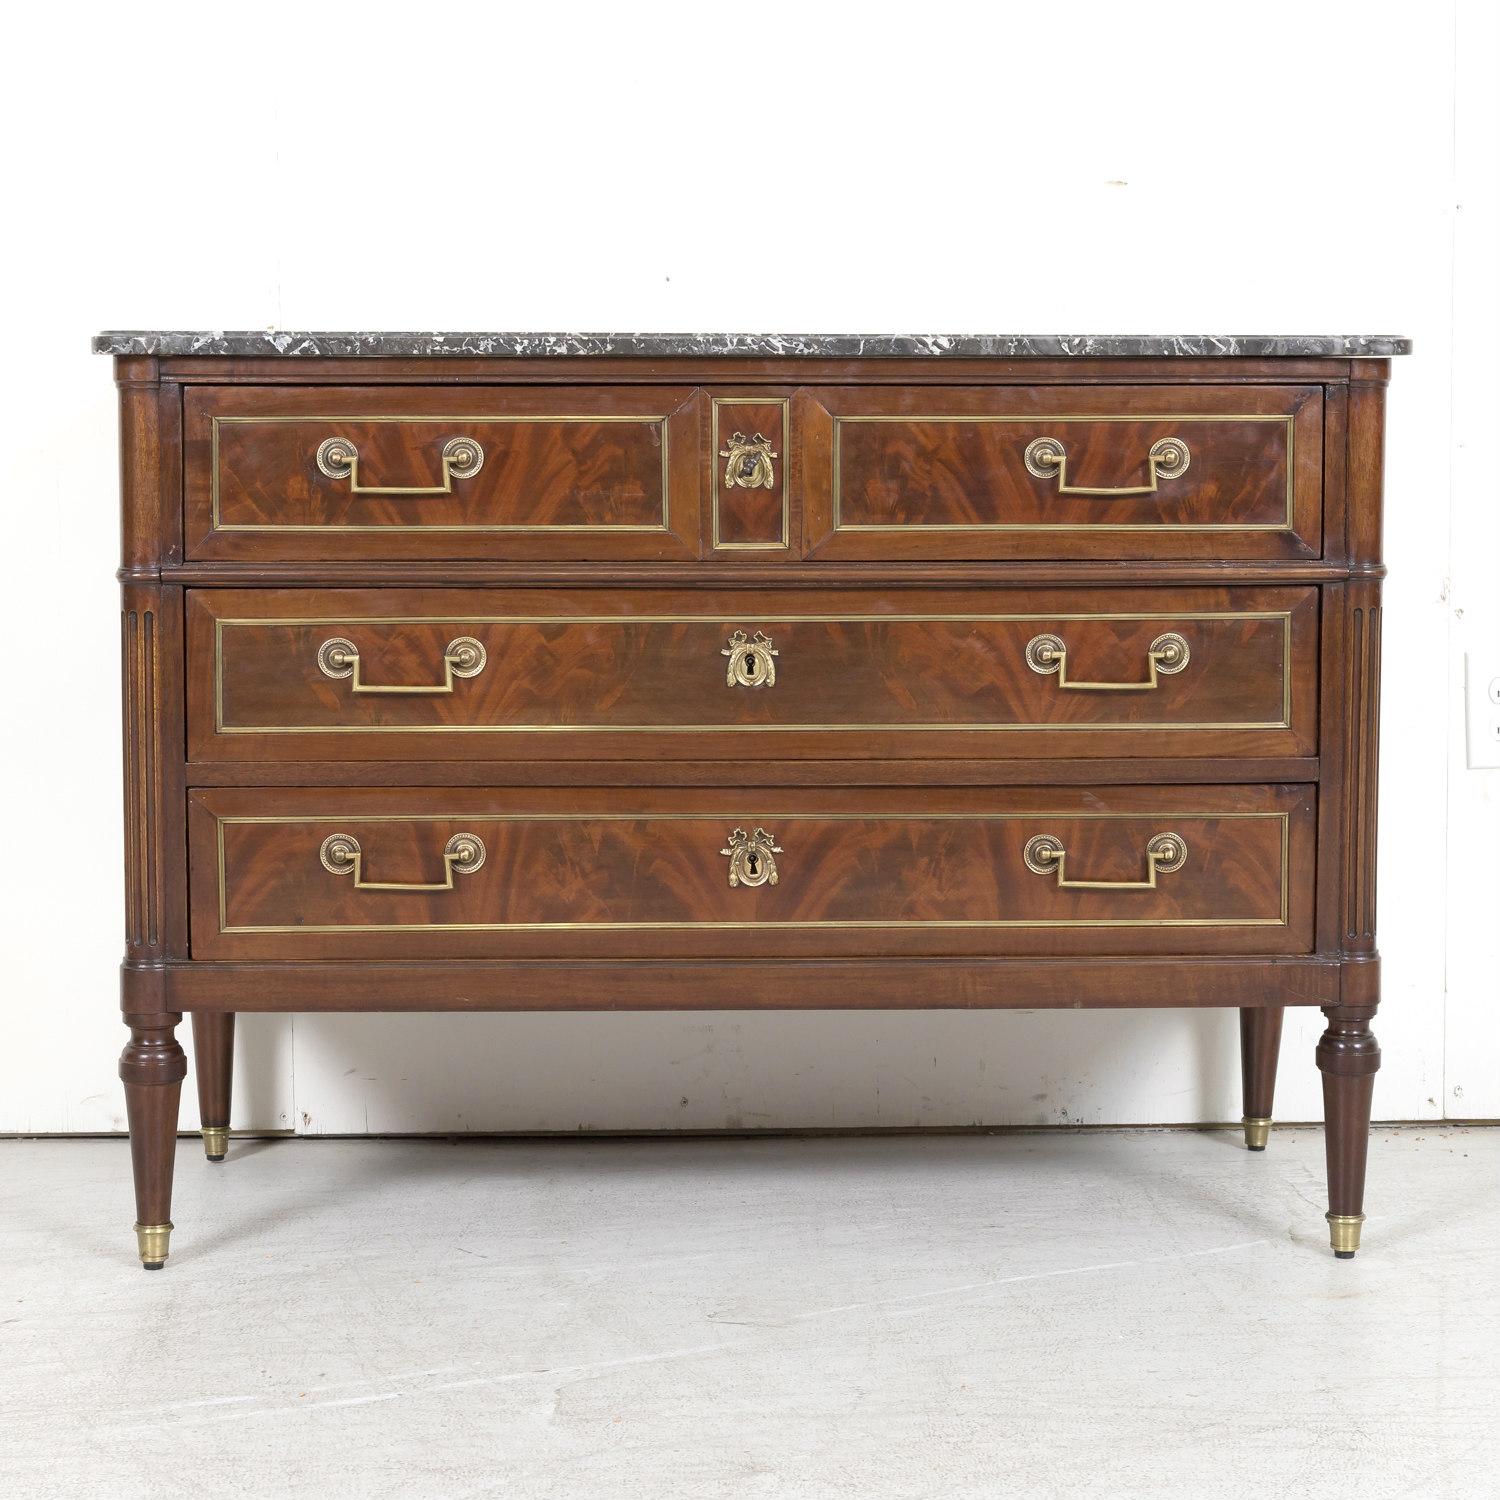 18th Century French Louis XVI Period Mahogany Commode with Saint Anne Marble Top In Good Condition For Sale In Birmingham, AL